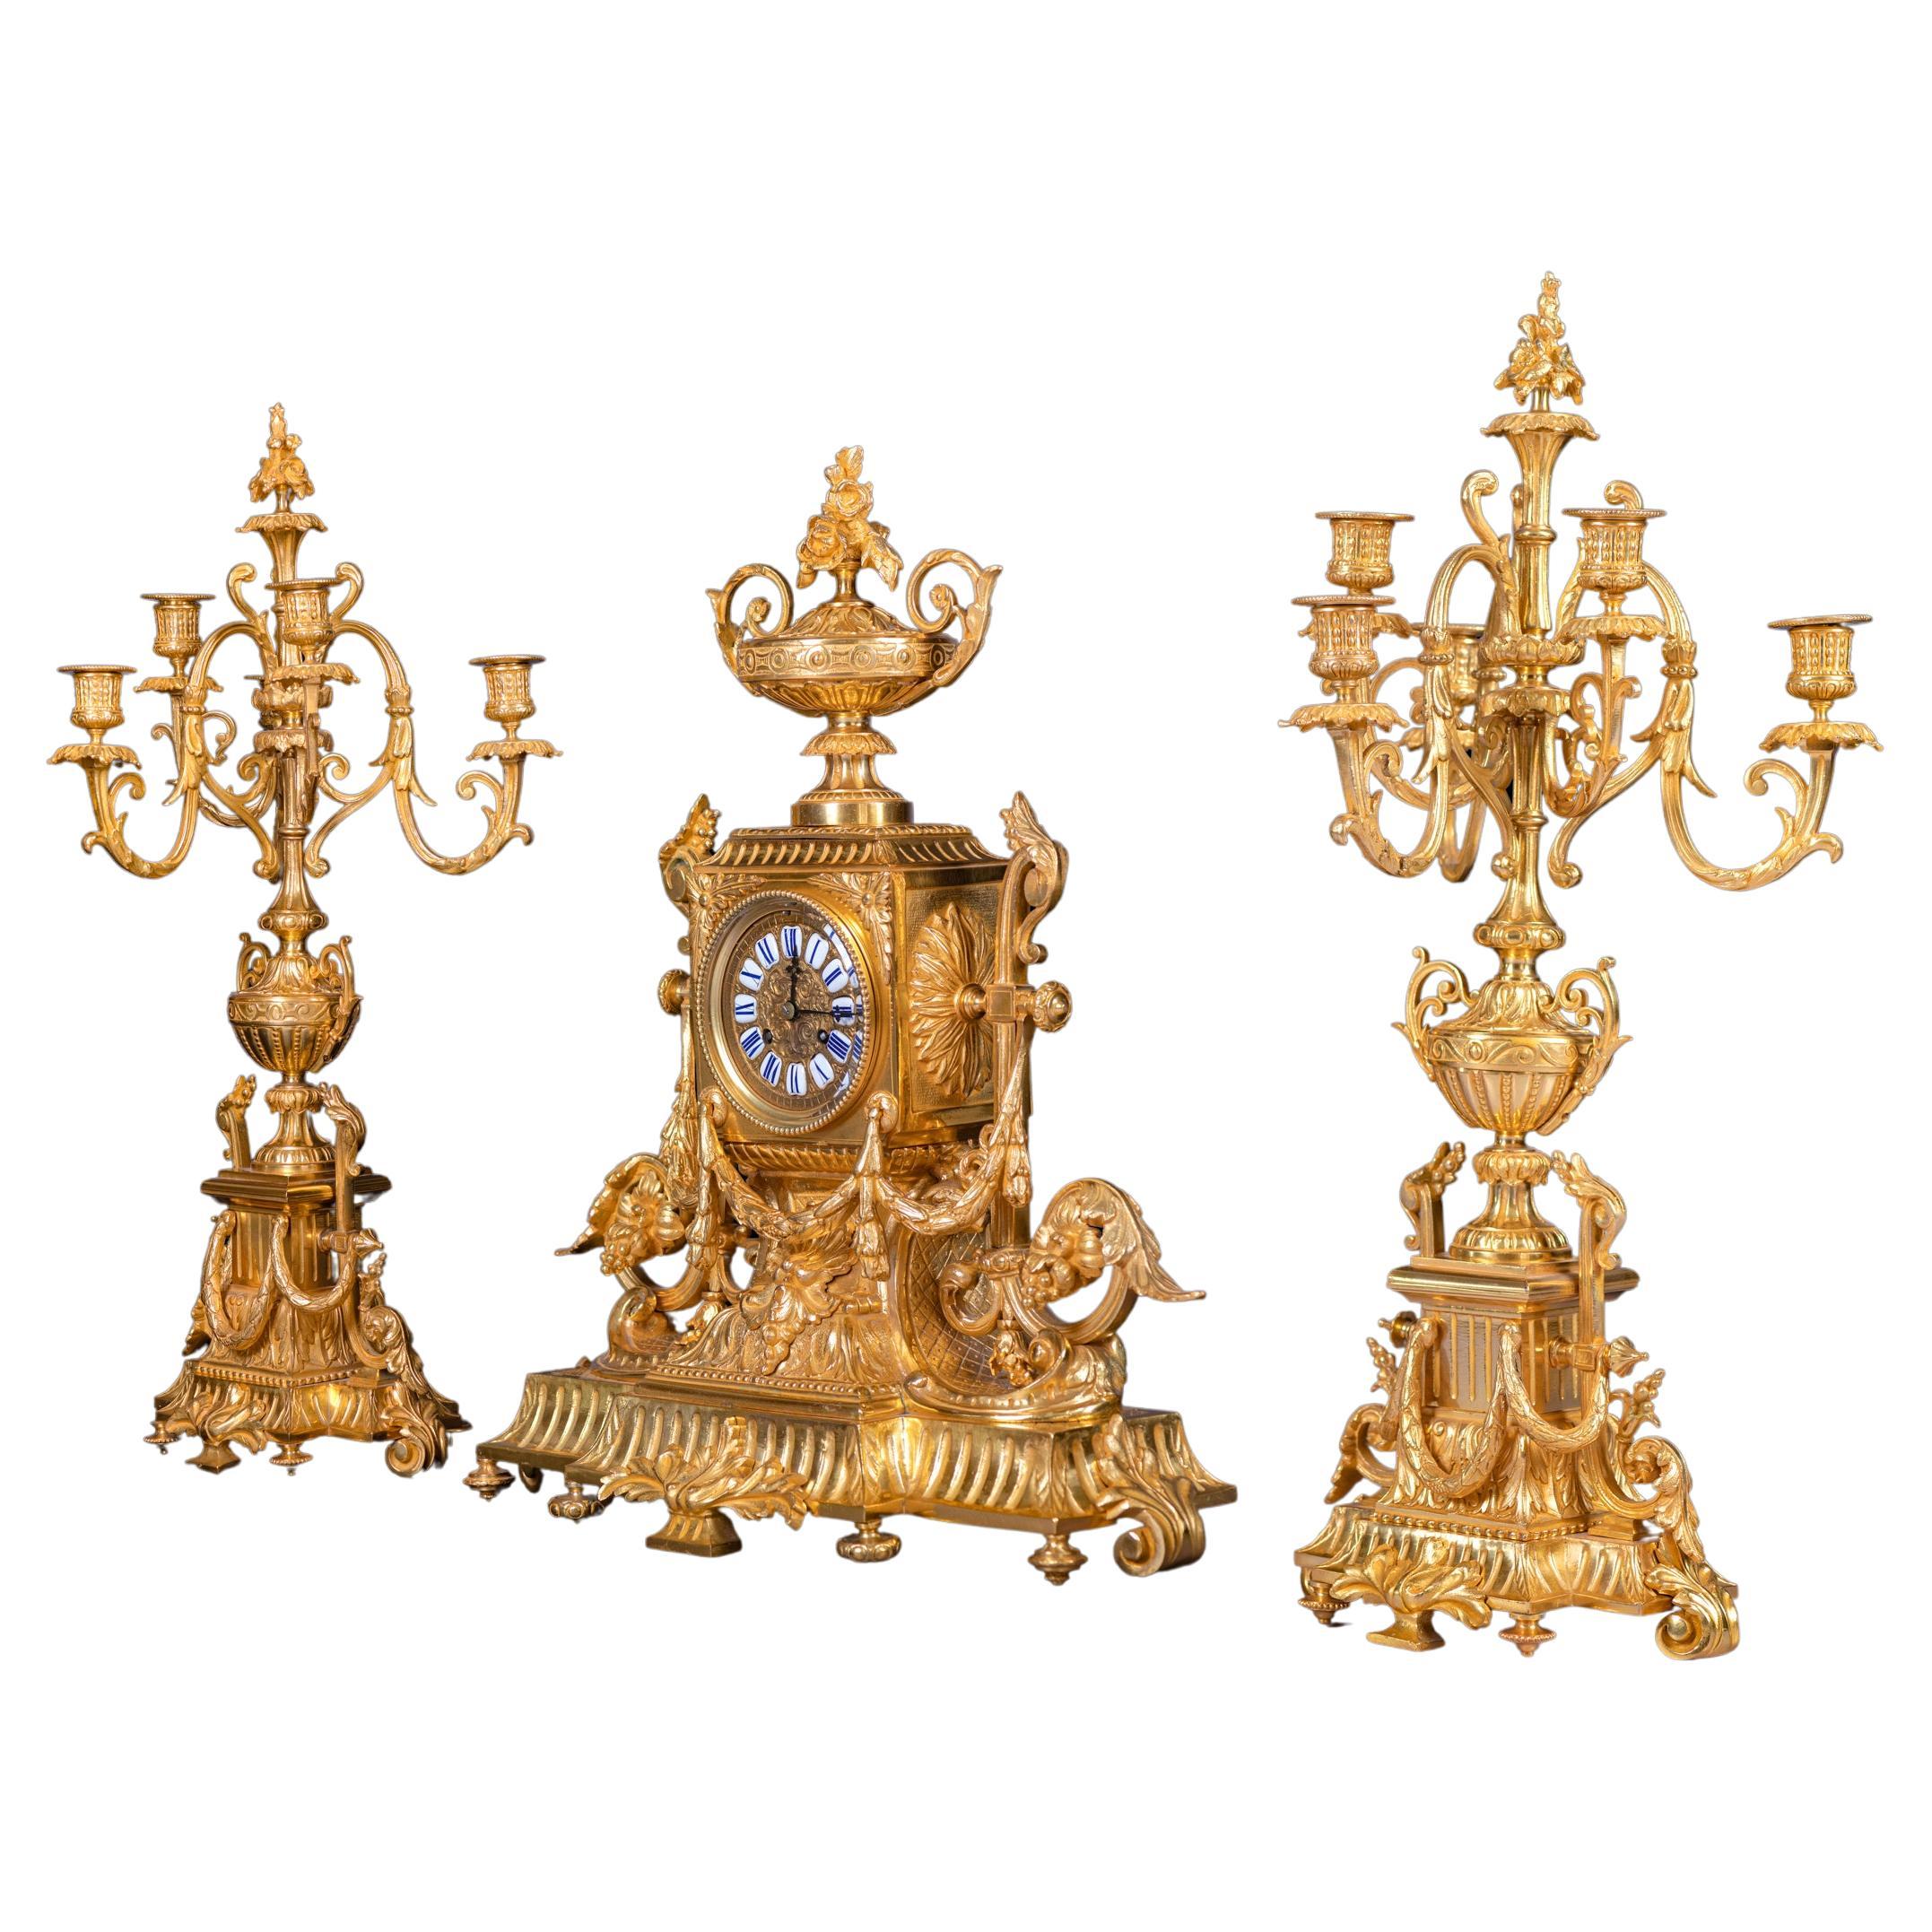 Large 19th Century French Ormolu Clock Garniture in the Louis XVI Style